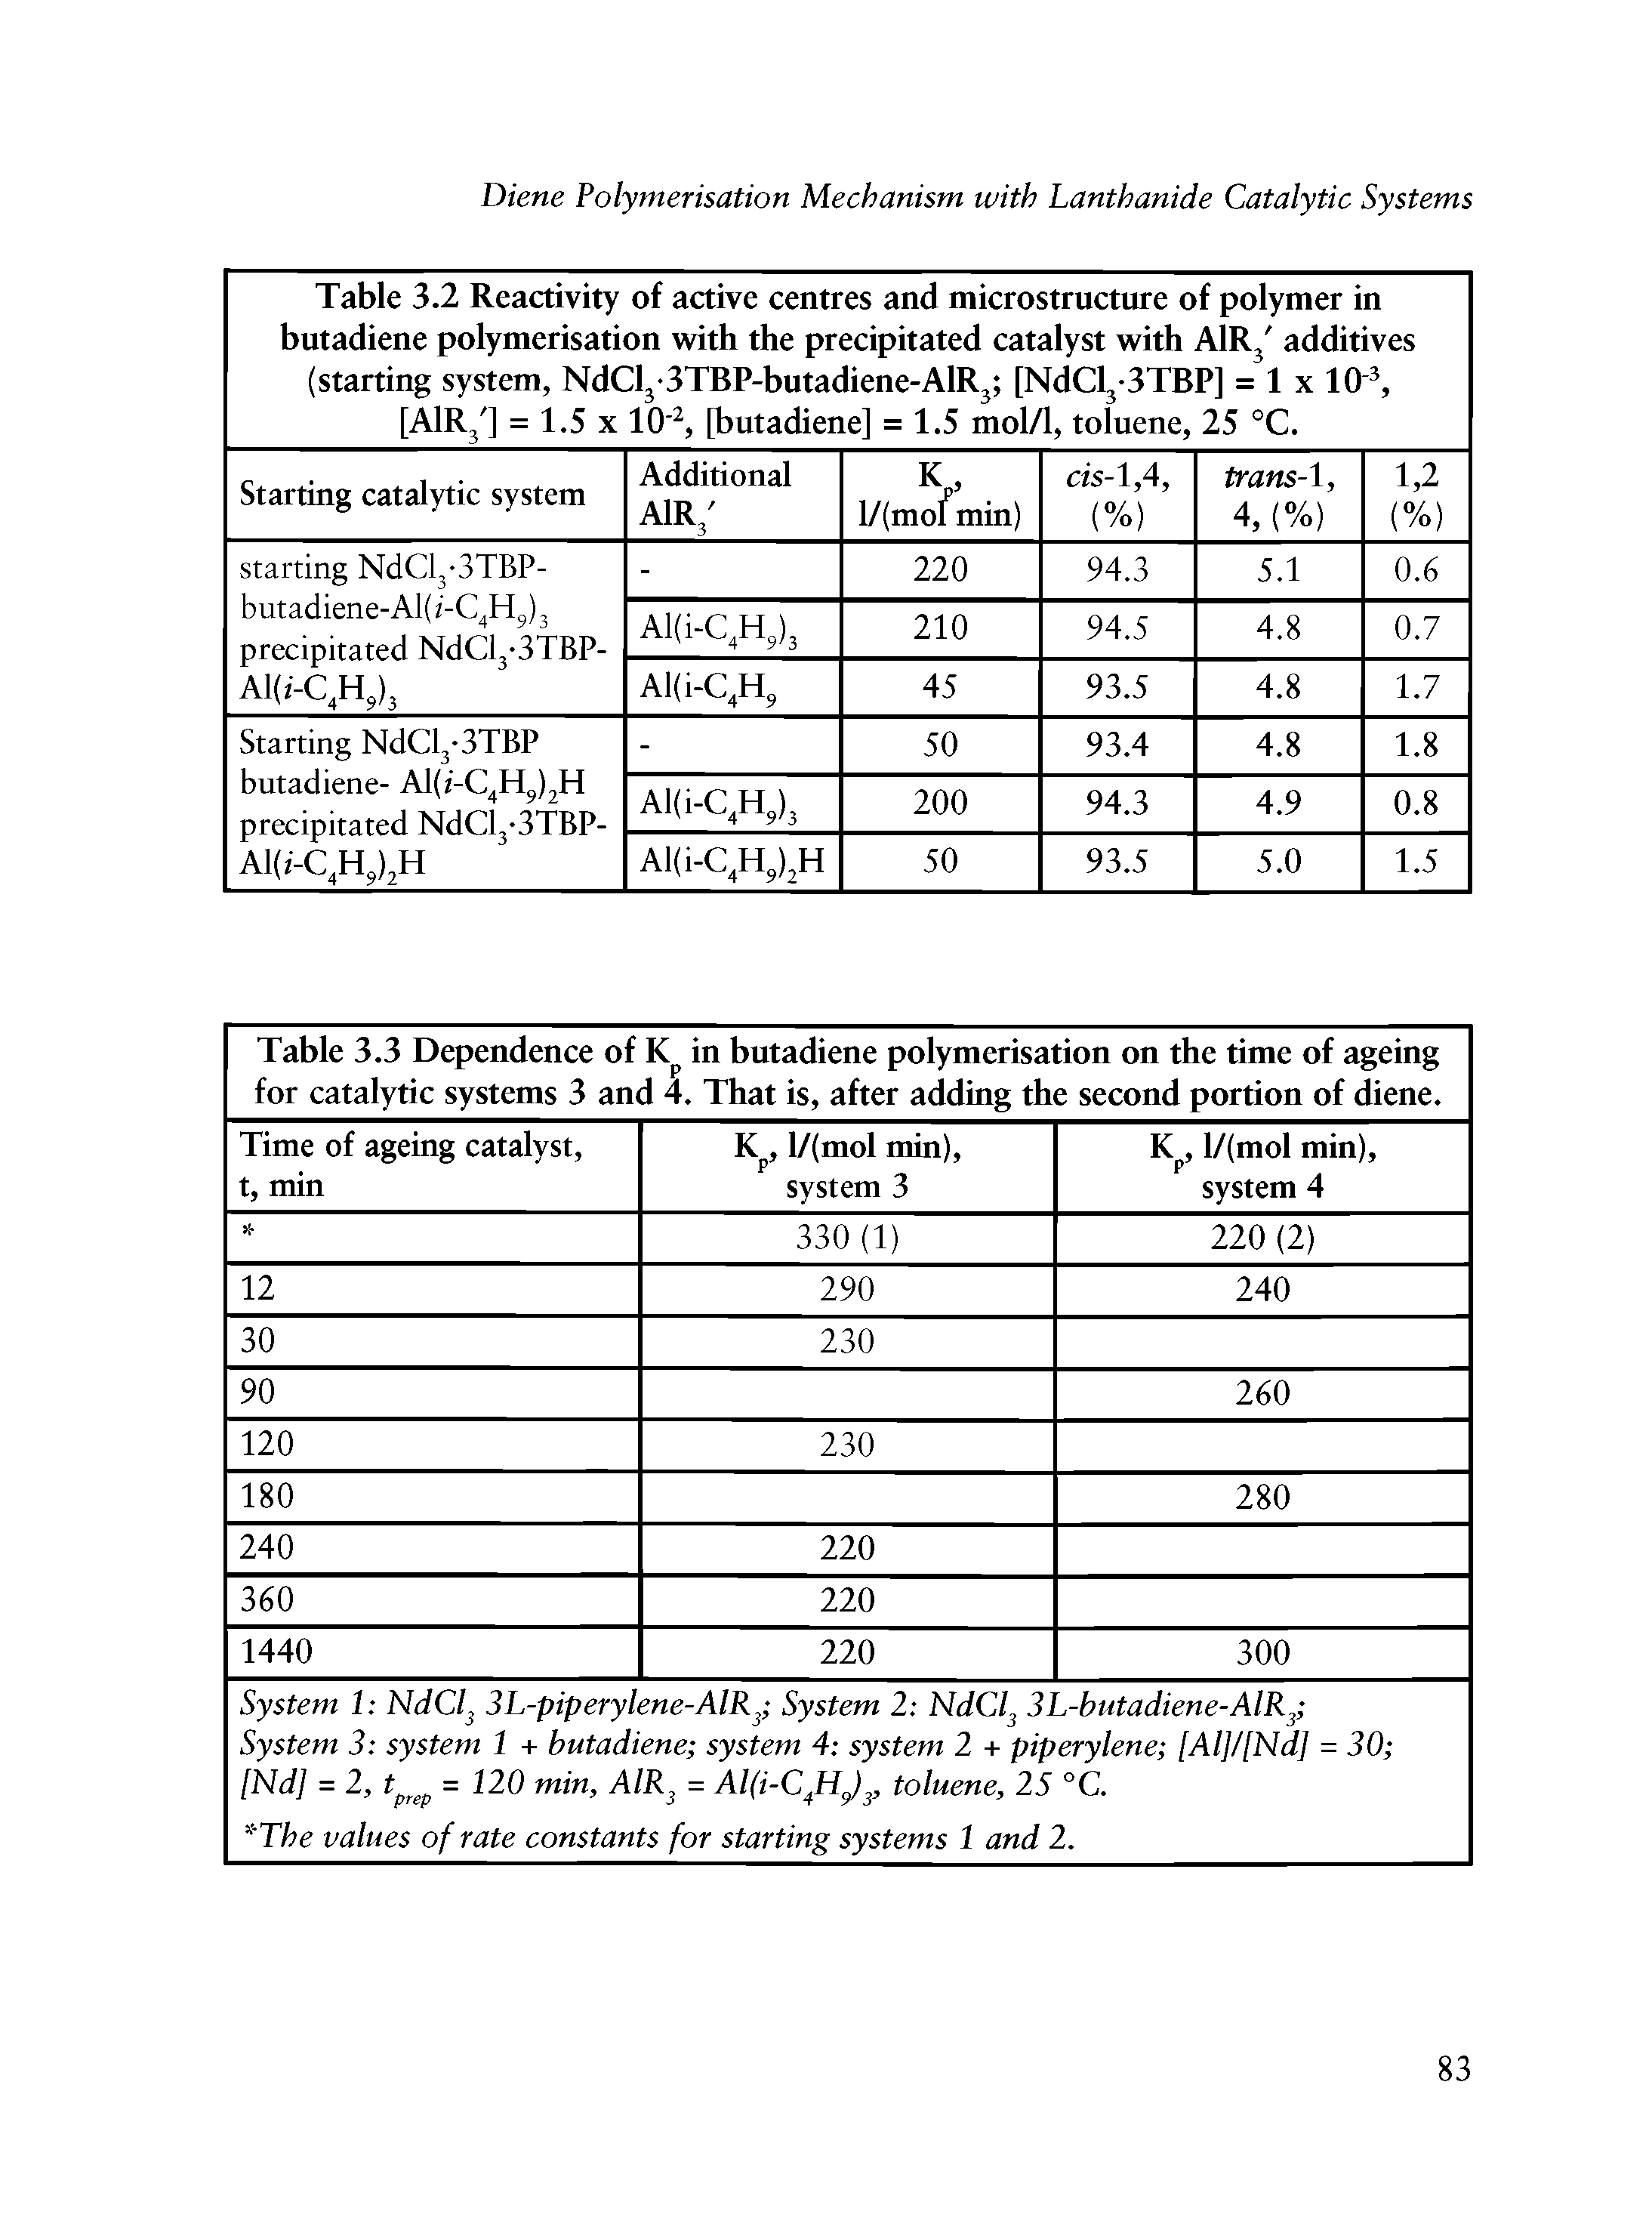 Table 3.3 Dependence of Kp in butadiene polymerisation on the time of ageing for catalytic systems 3 and 4. That is, after adding the second portion of diene. ...